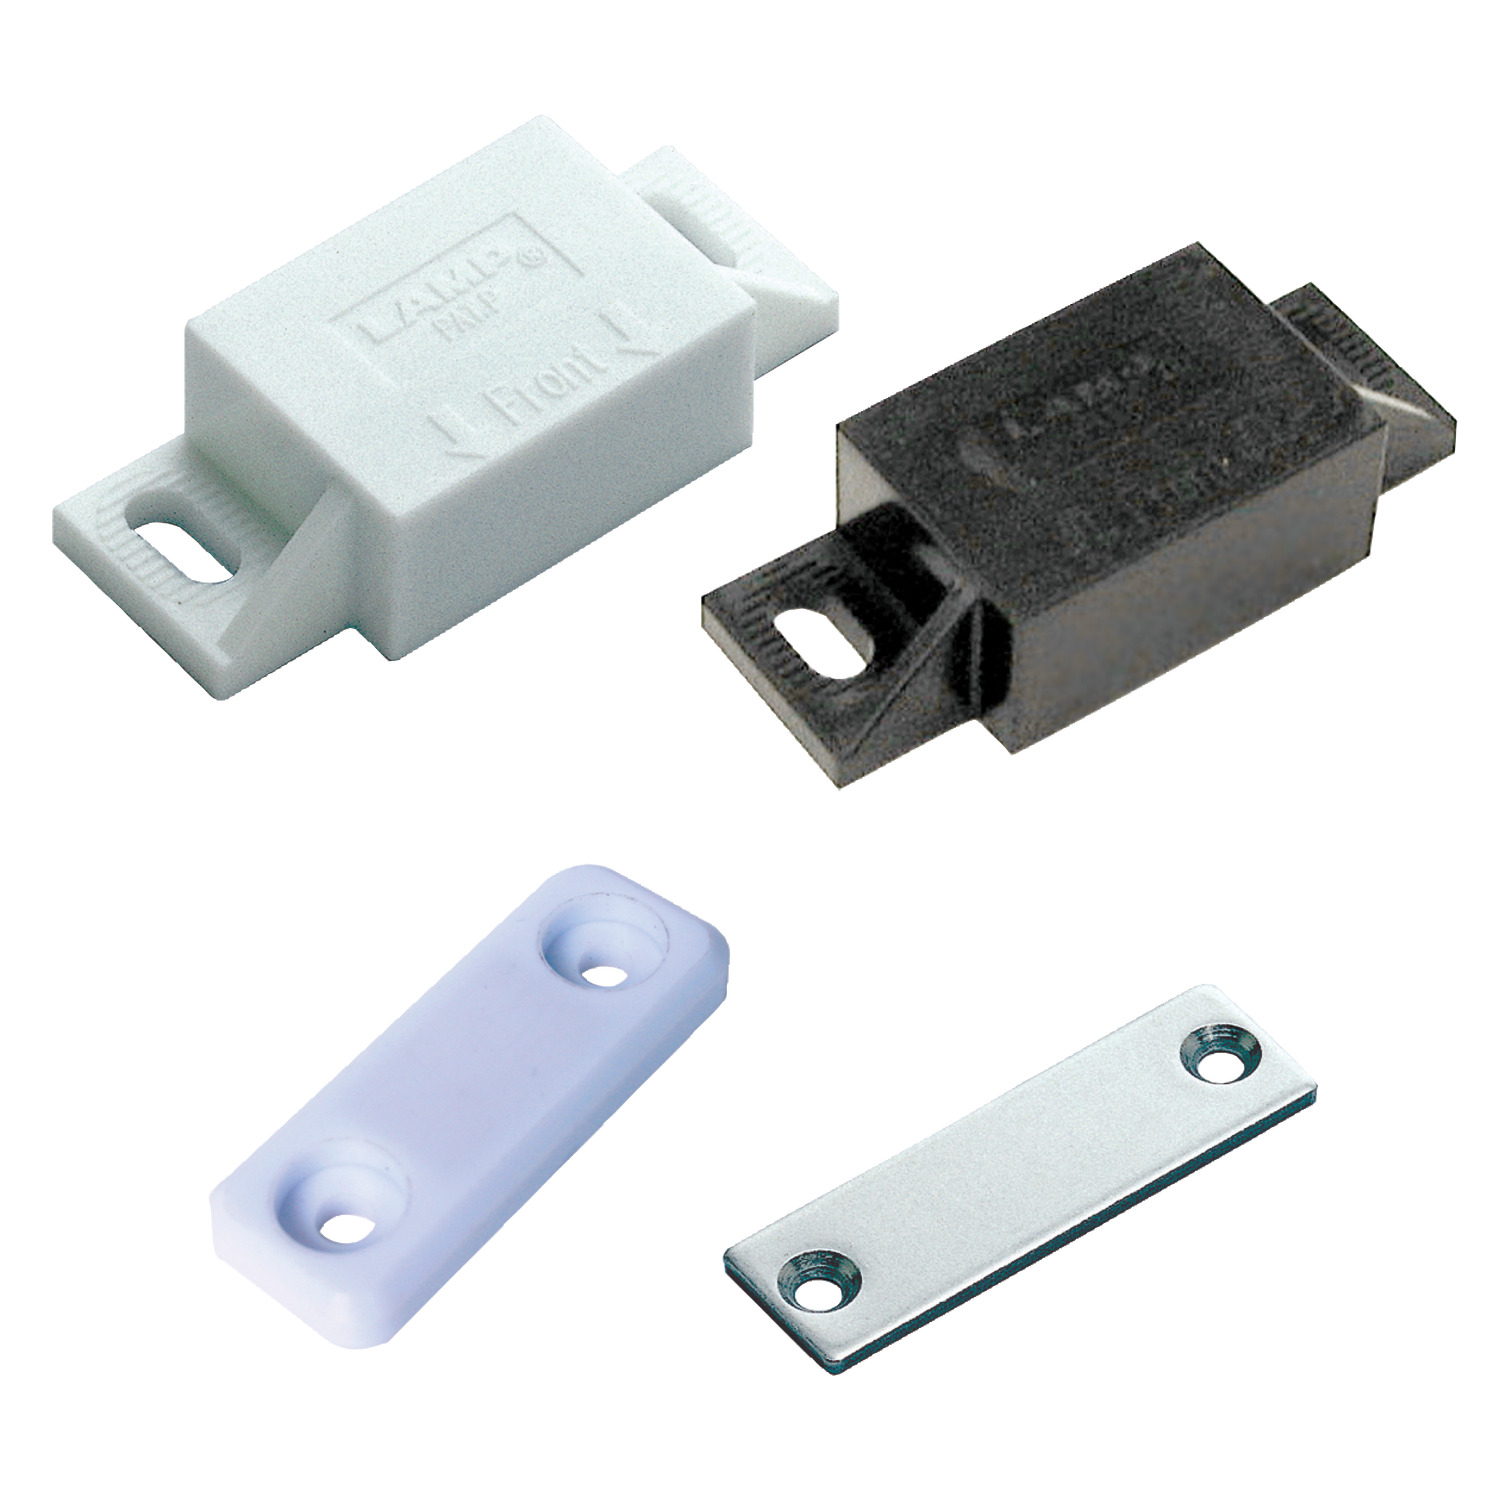 Magnetic Catches - Hermetically Sealed For clean room and medical environment, hermetically sealed. Magnetic catches ideal for scientific equipment and special purpose 